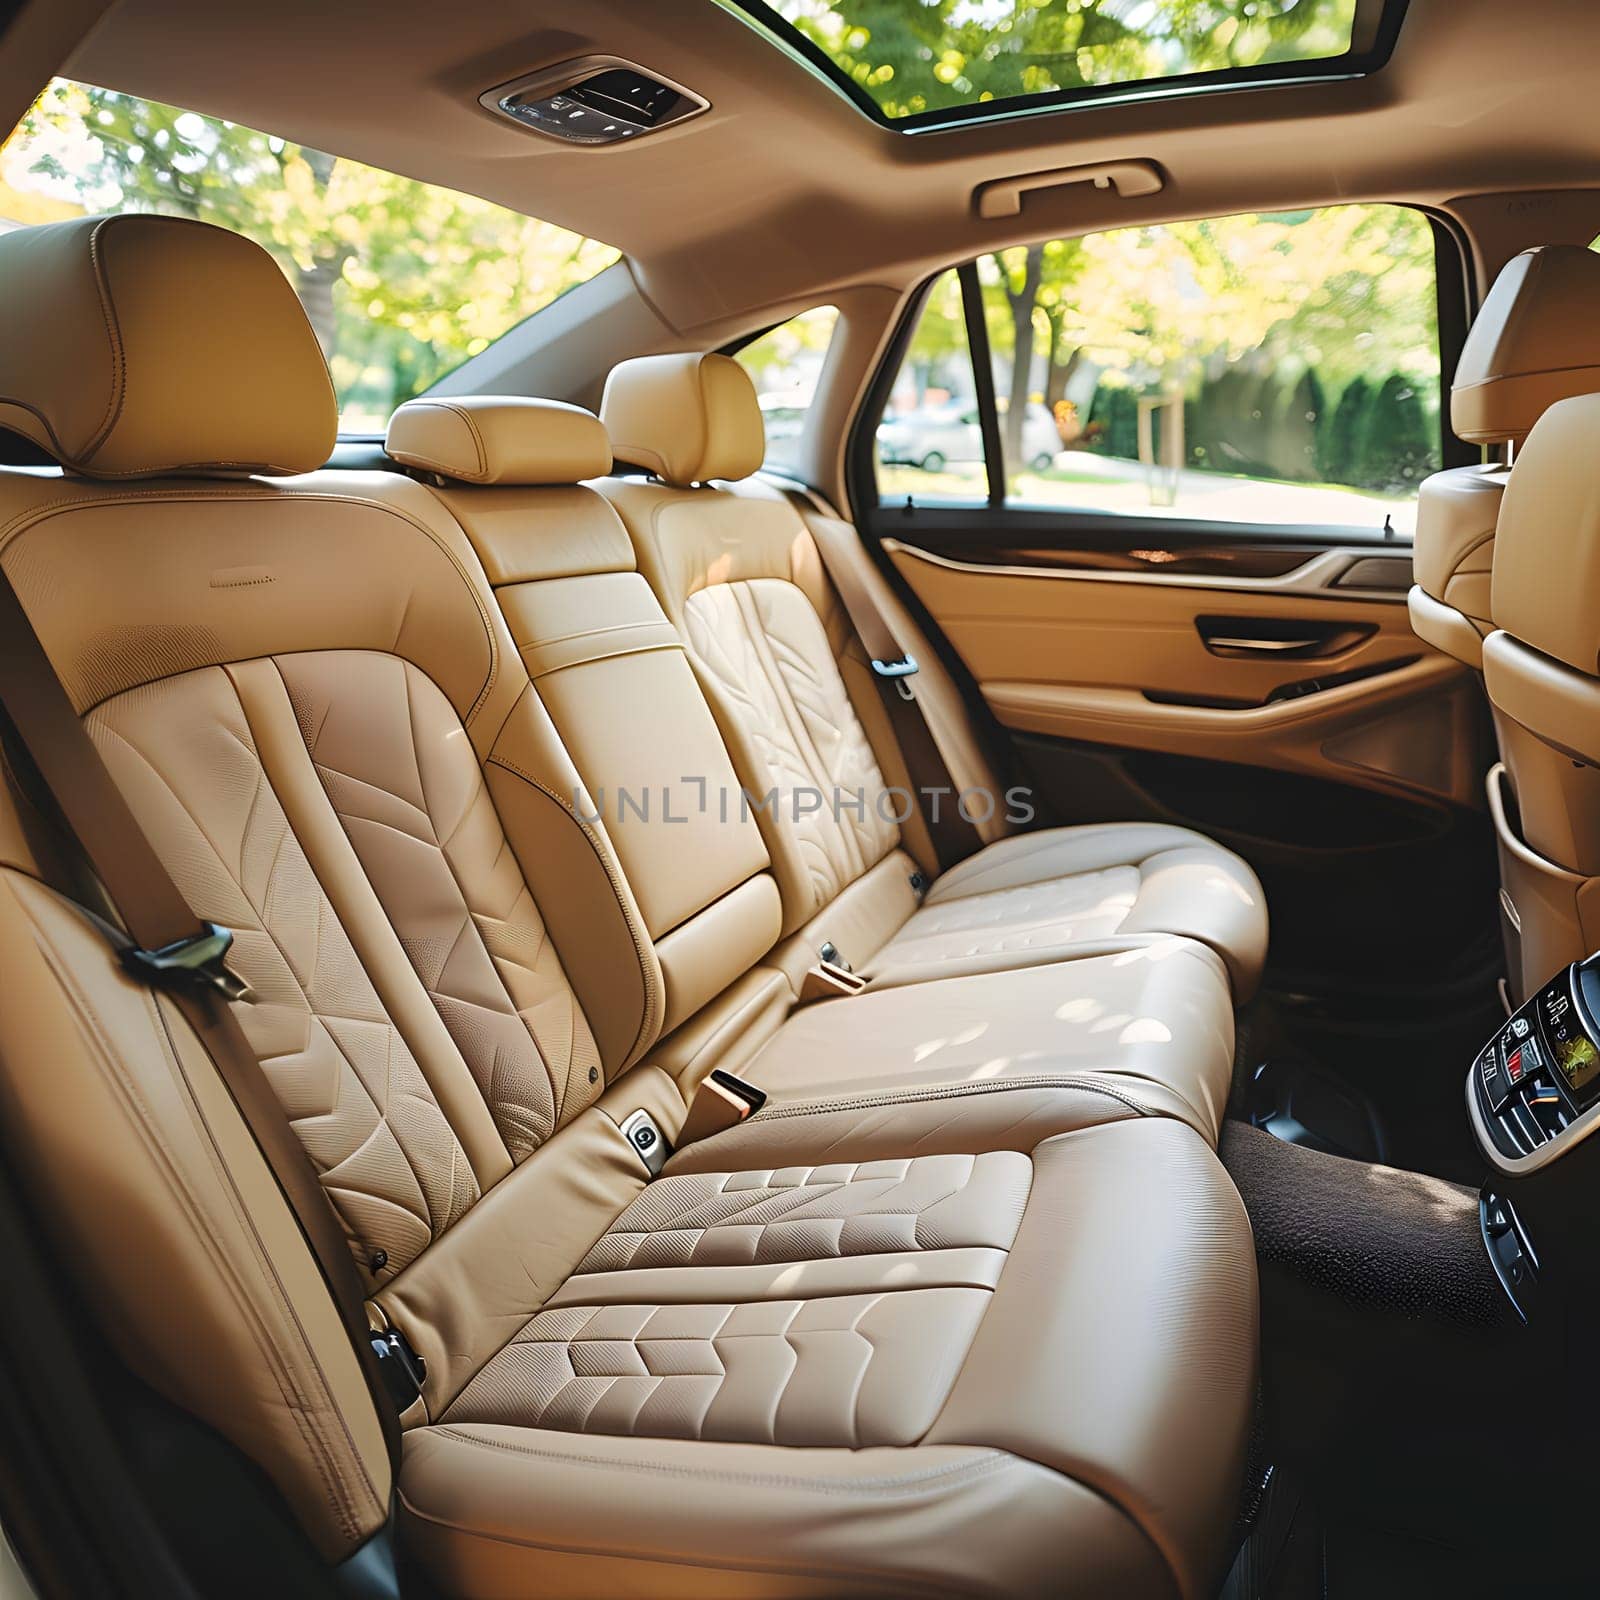 Tan leather seats in a cars rear for luxurious comfort while on the go by Nadtochiy